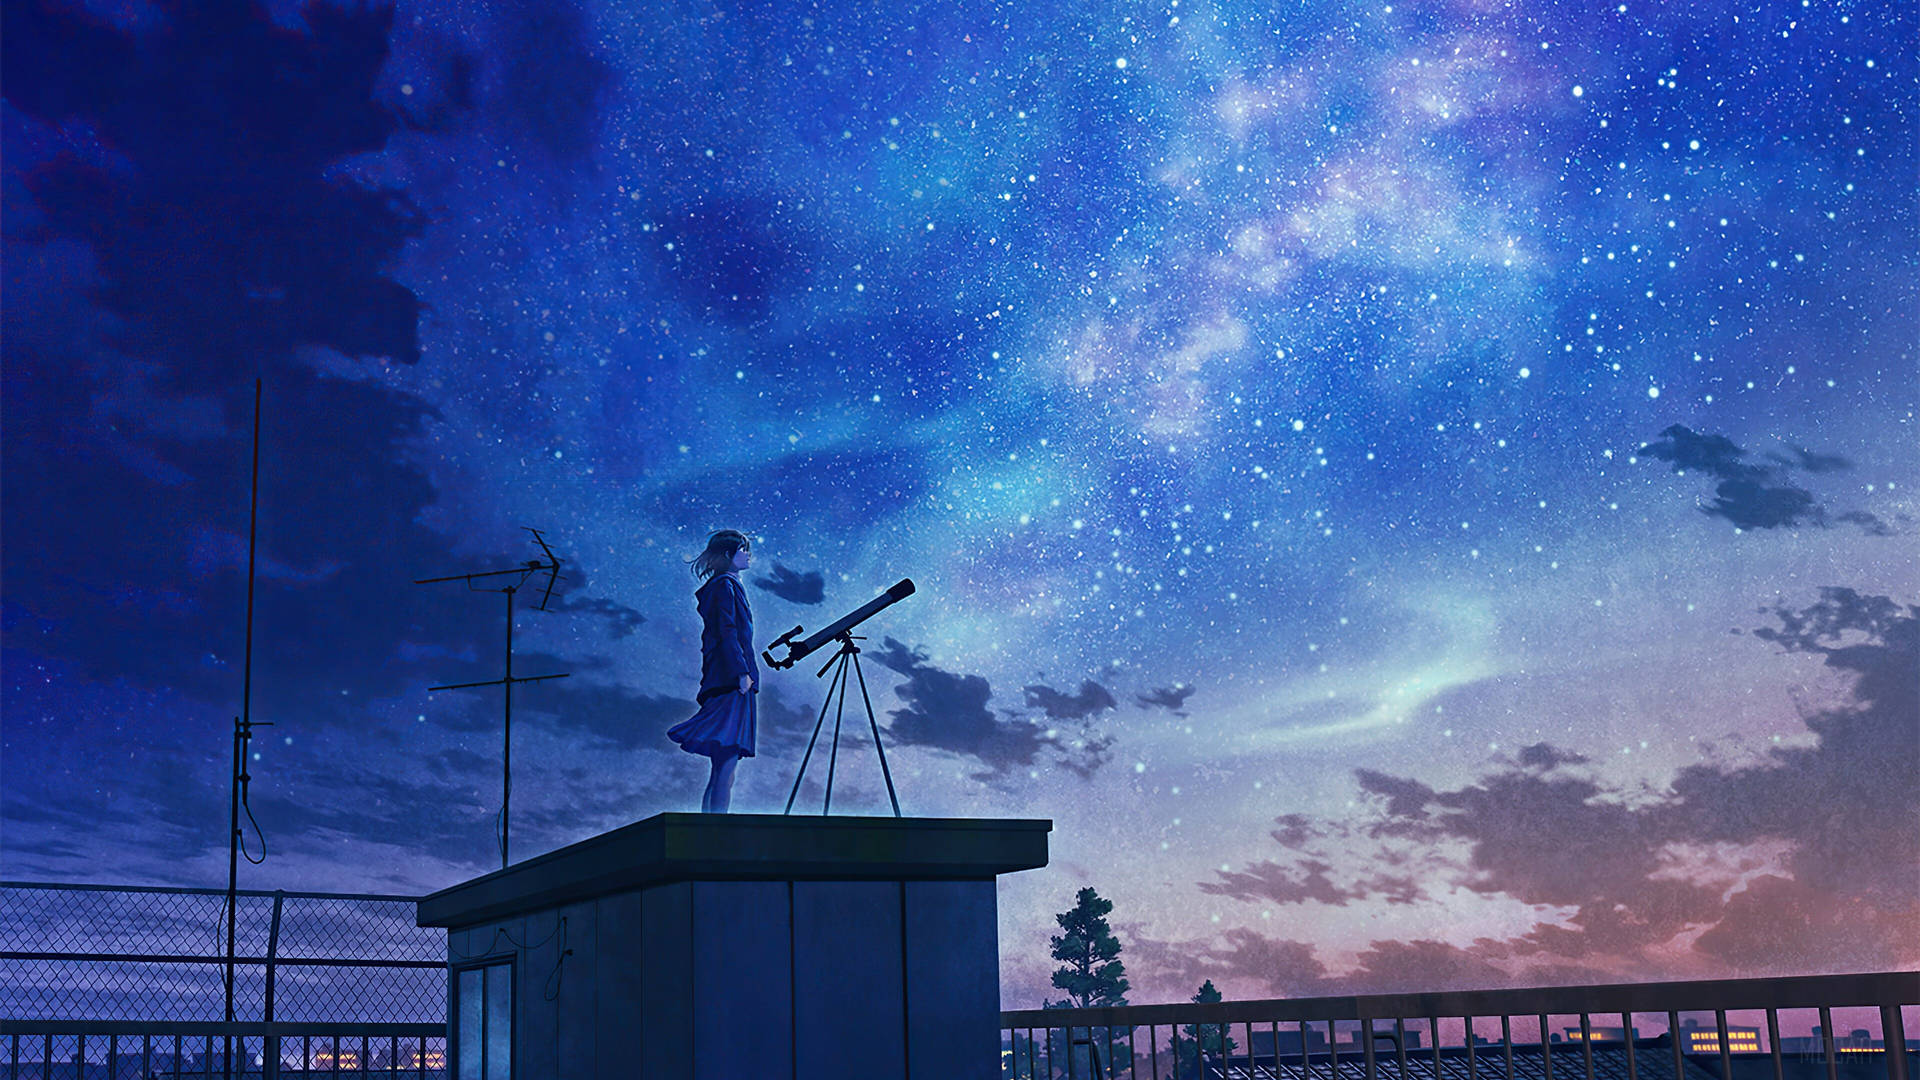 Animation Anime Girl Watching Stars With Telescope Background